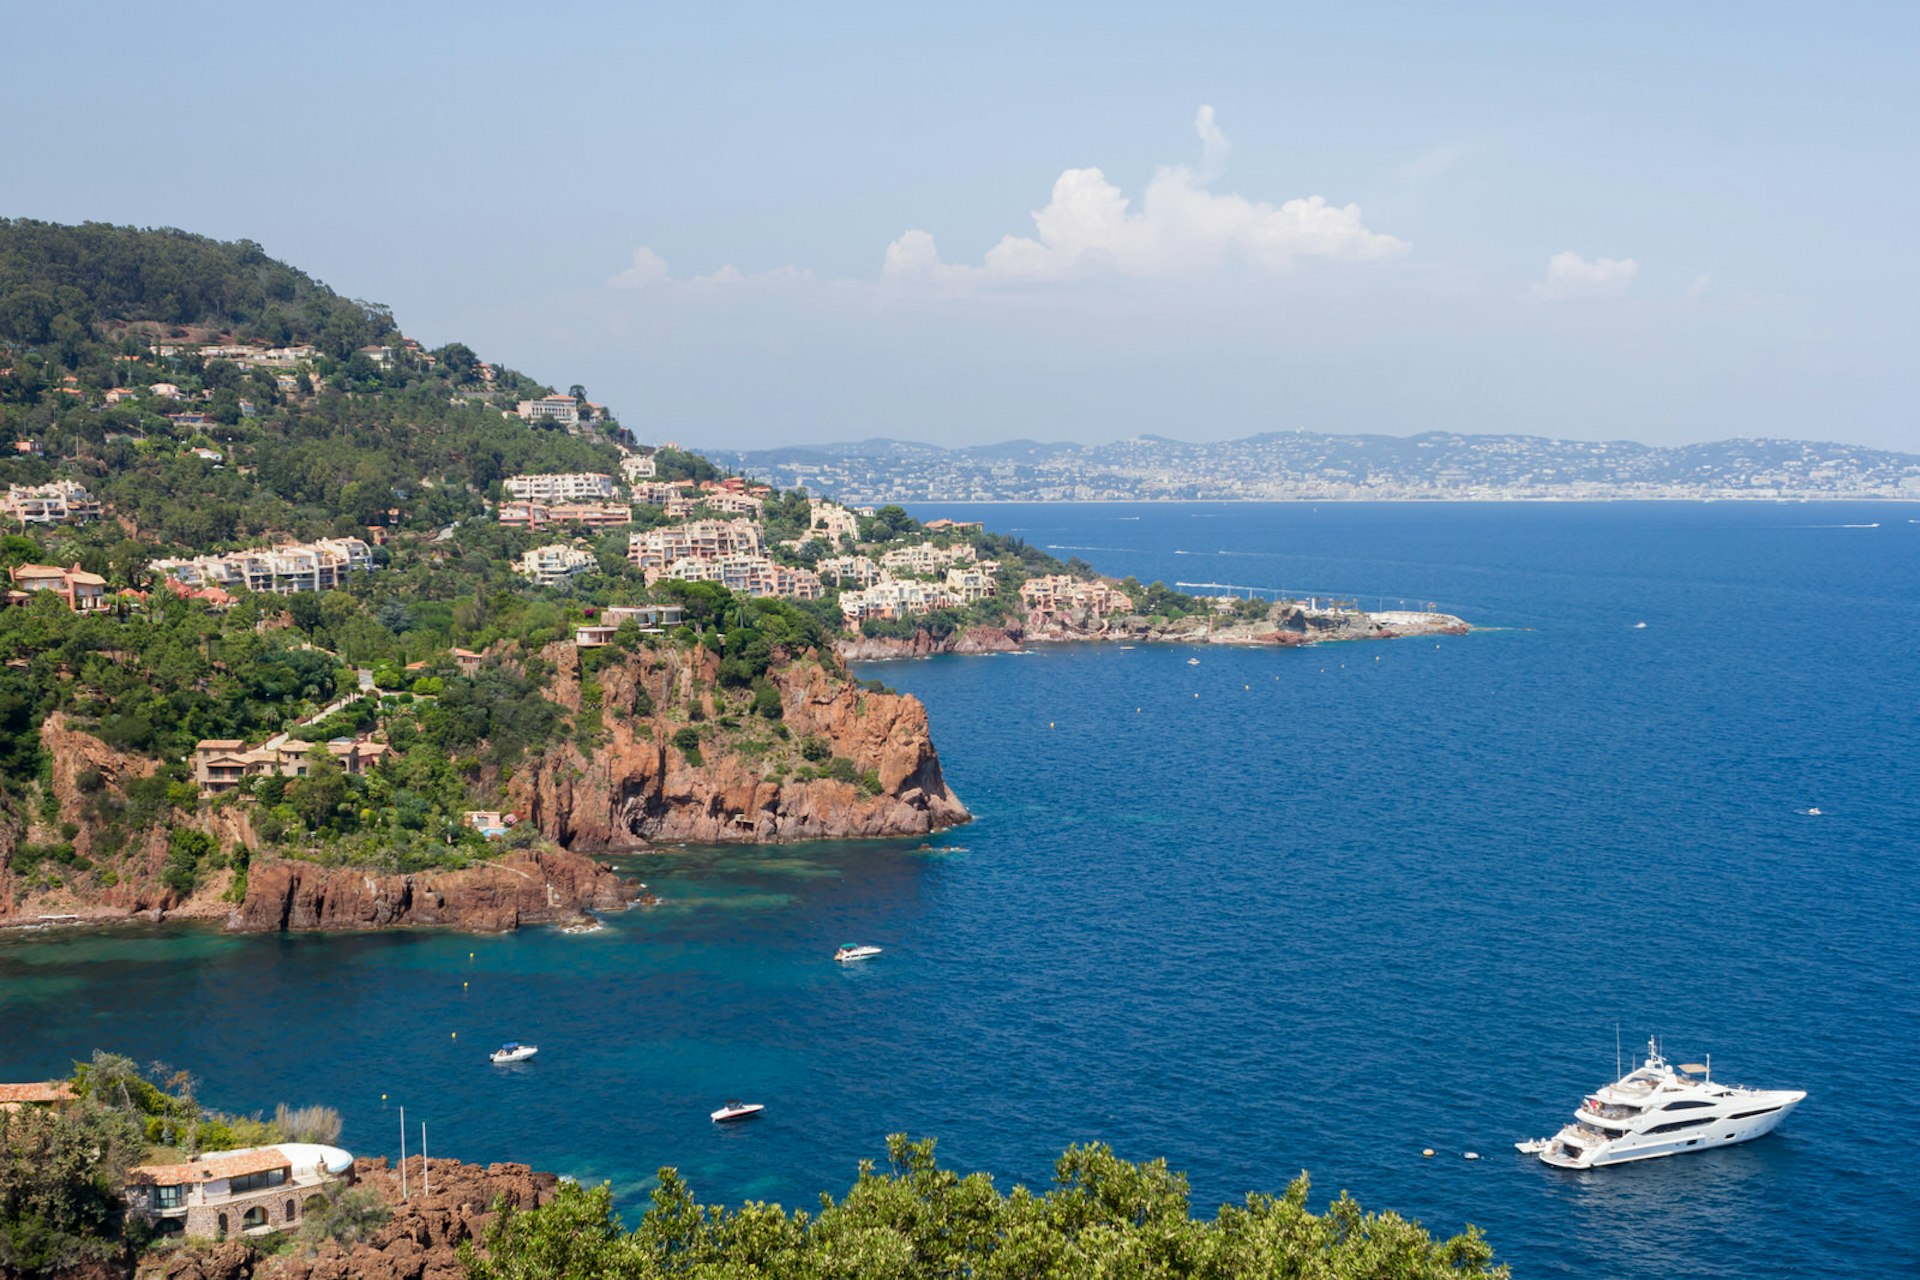 A luxury yacht floats on azure waters along a beautiful bay beach with Cannes in the background ©rochus/Shutterstock